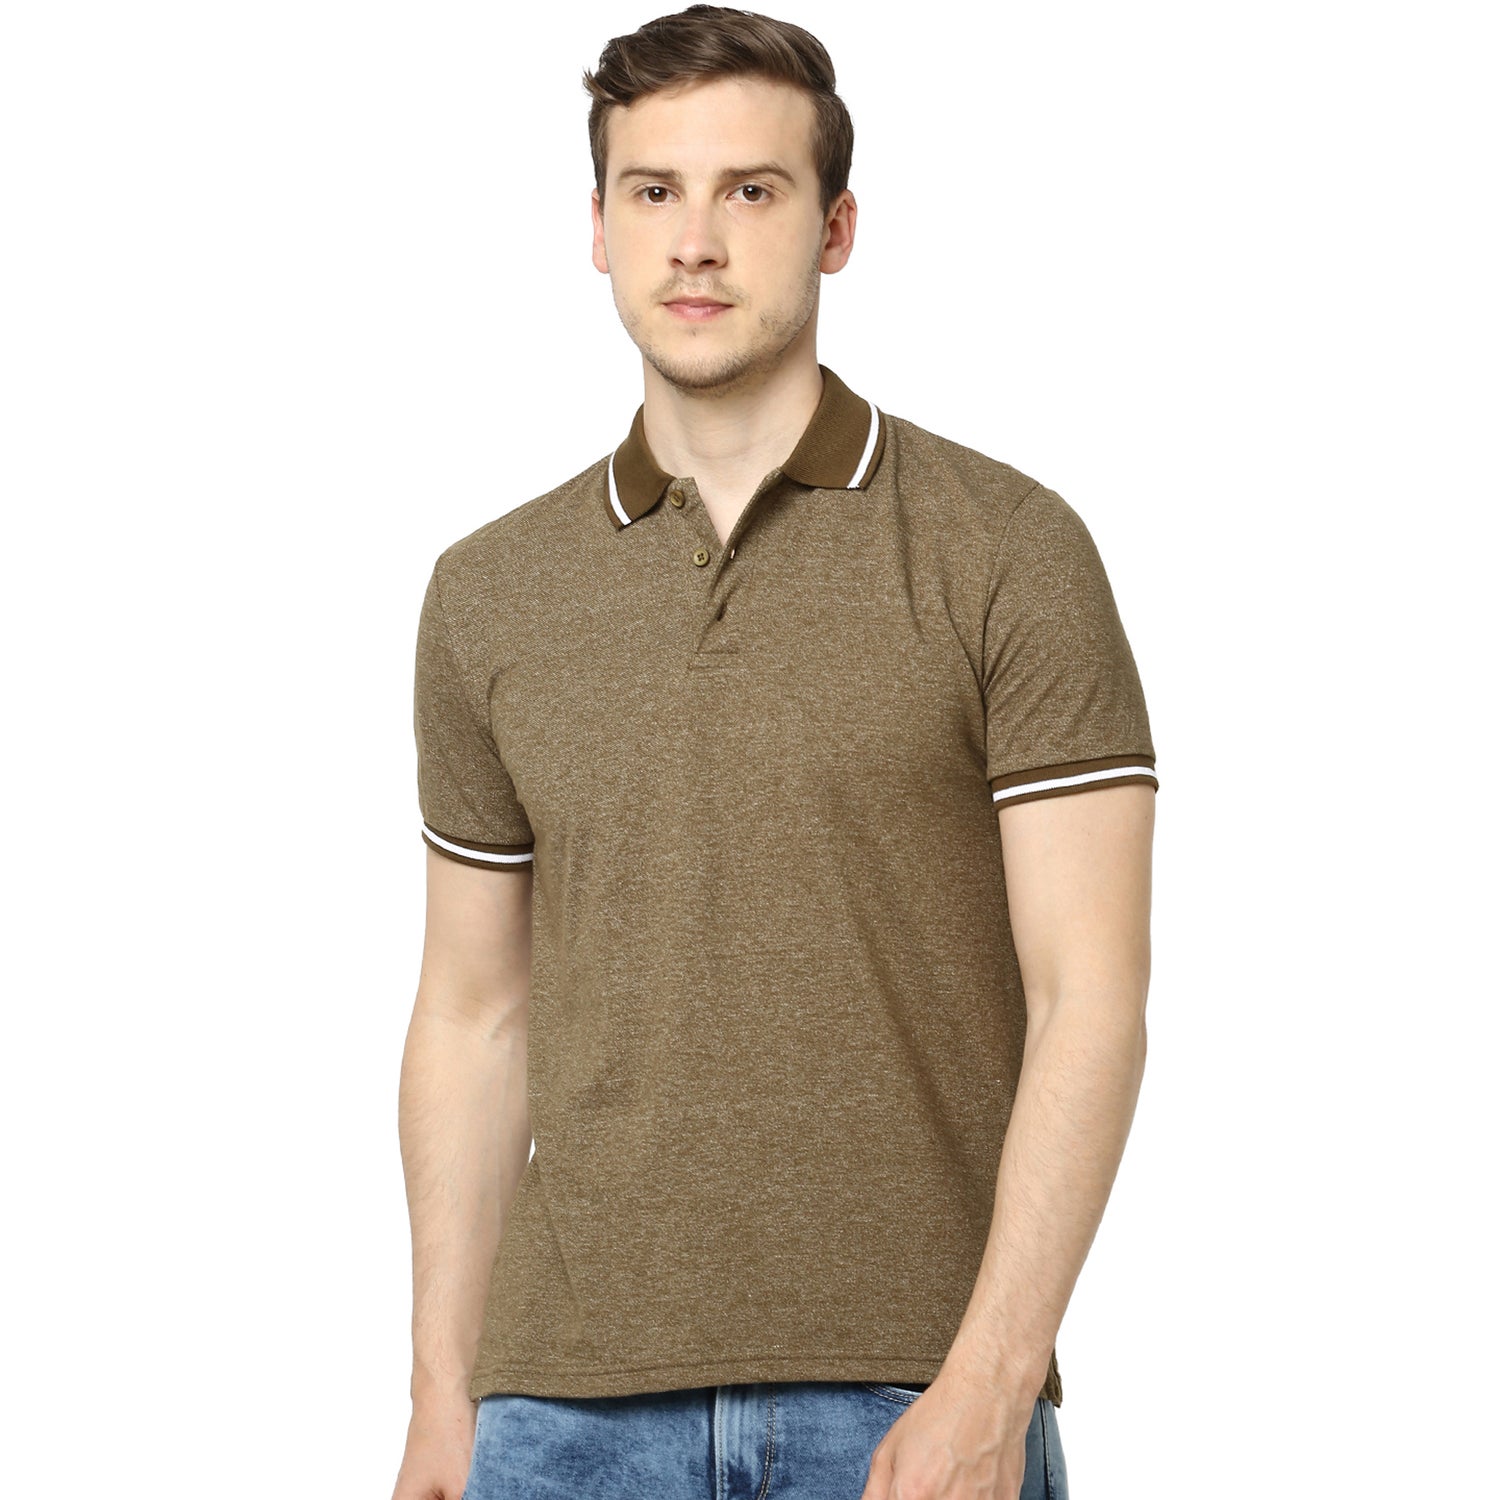 Olive Green Self Design Polo Collar T-shirt (TEGRINDLE)